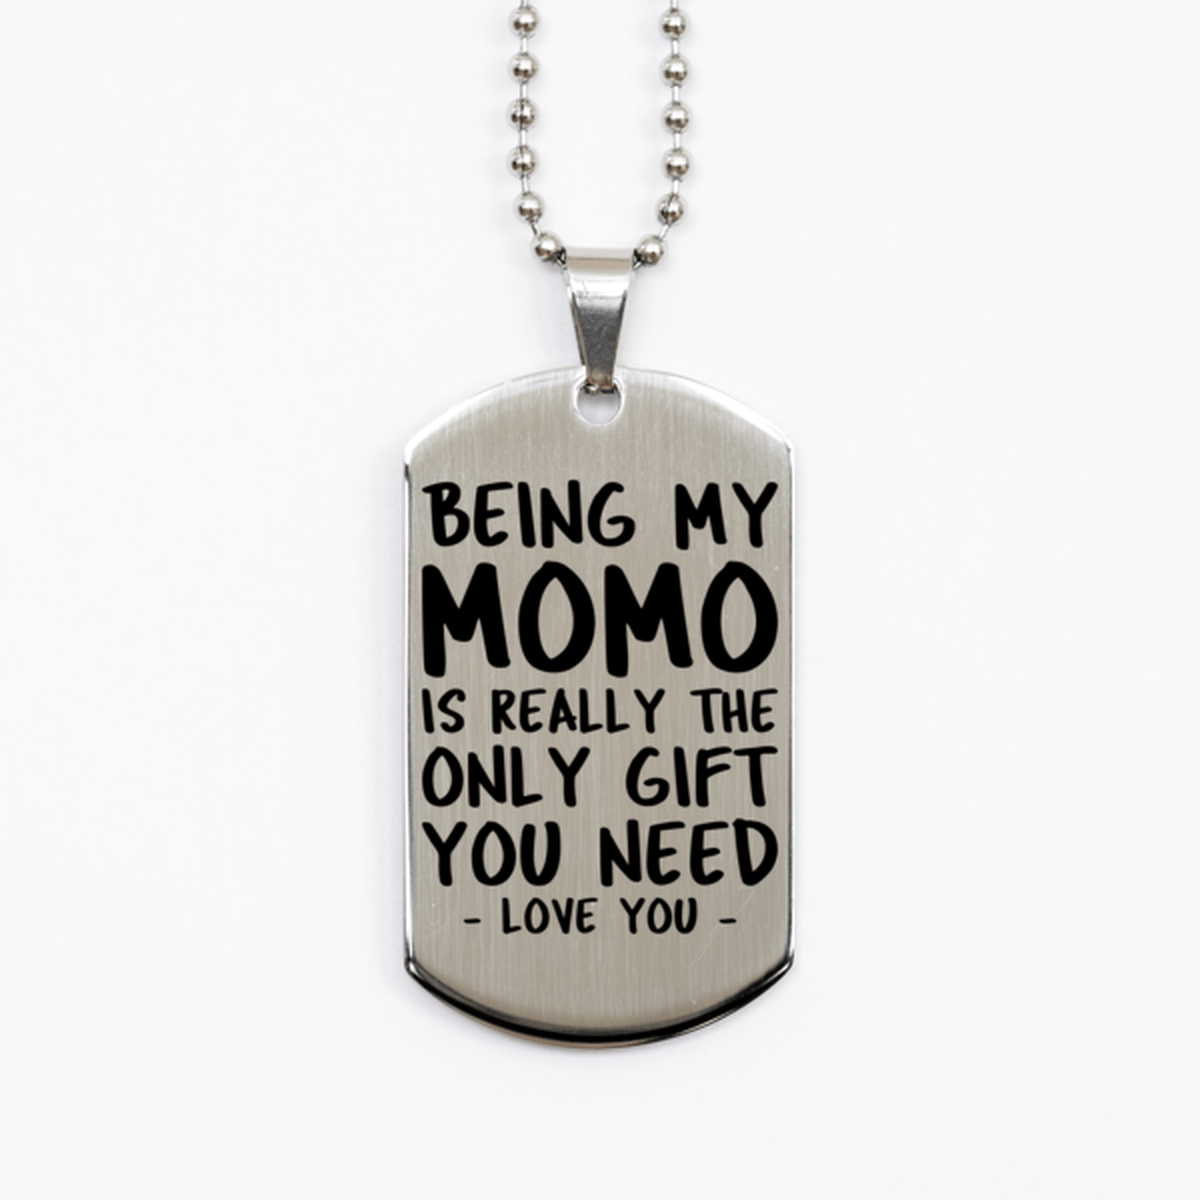 Funny Momo Silver Dog Tag Necklace, Being My Momo Is Really the Only Gift You Need, Best Birthday Gifts for Momo